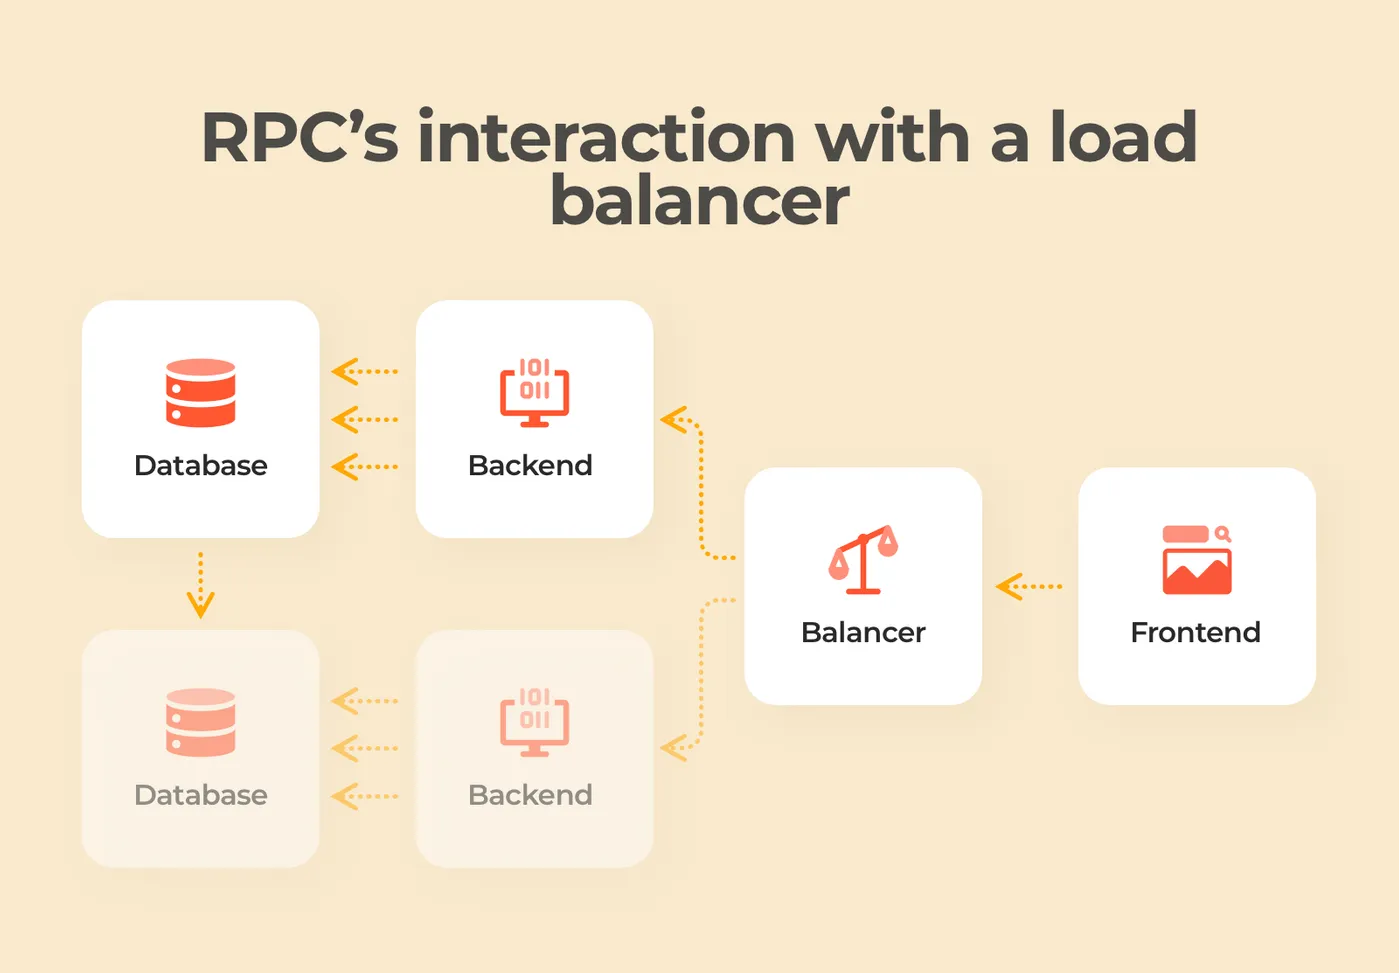 RPC interaction with a load balancer